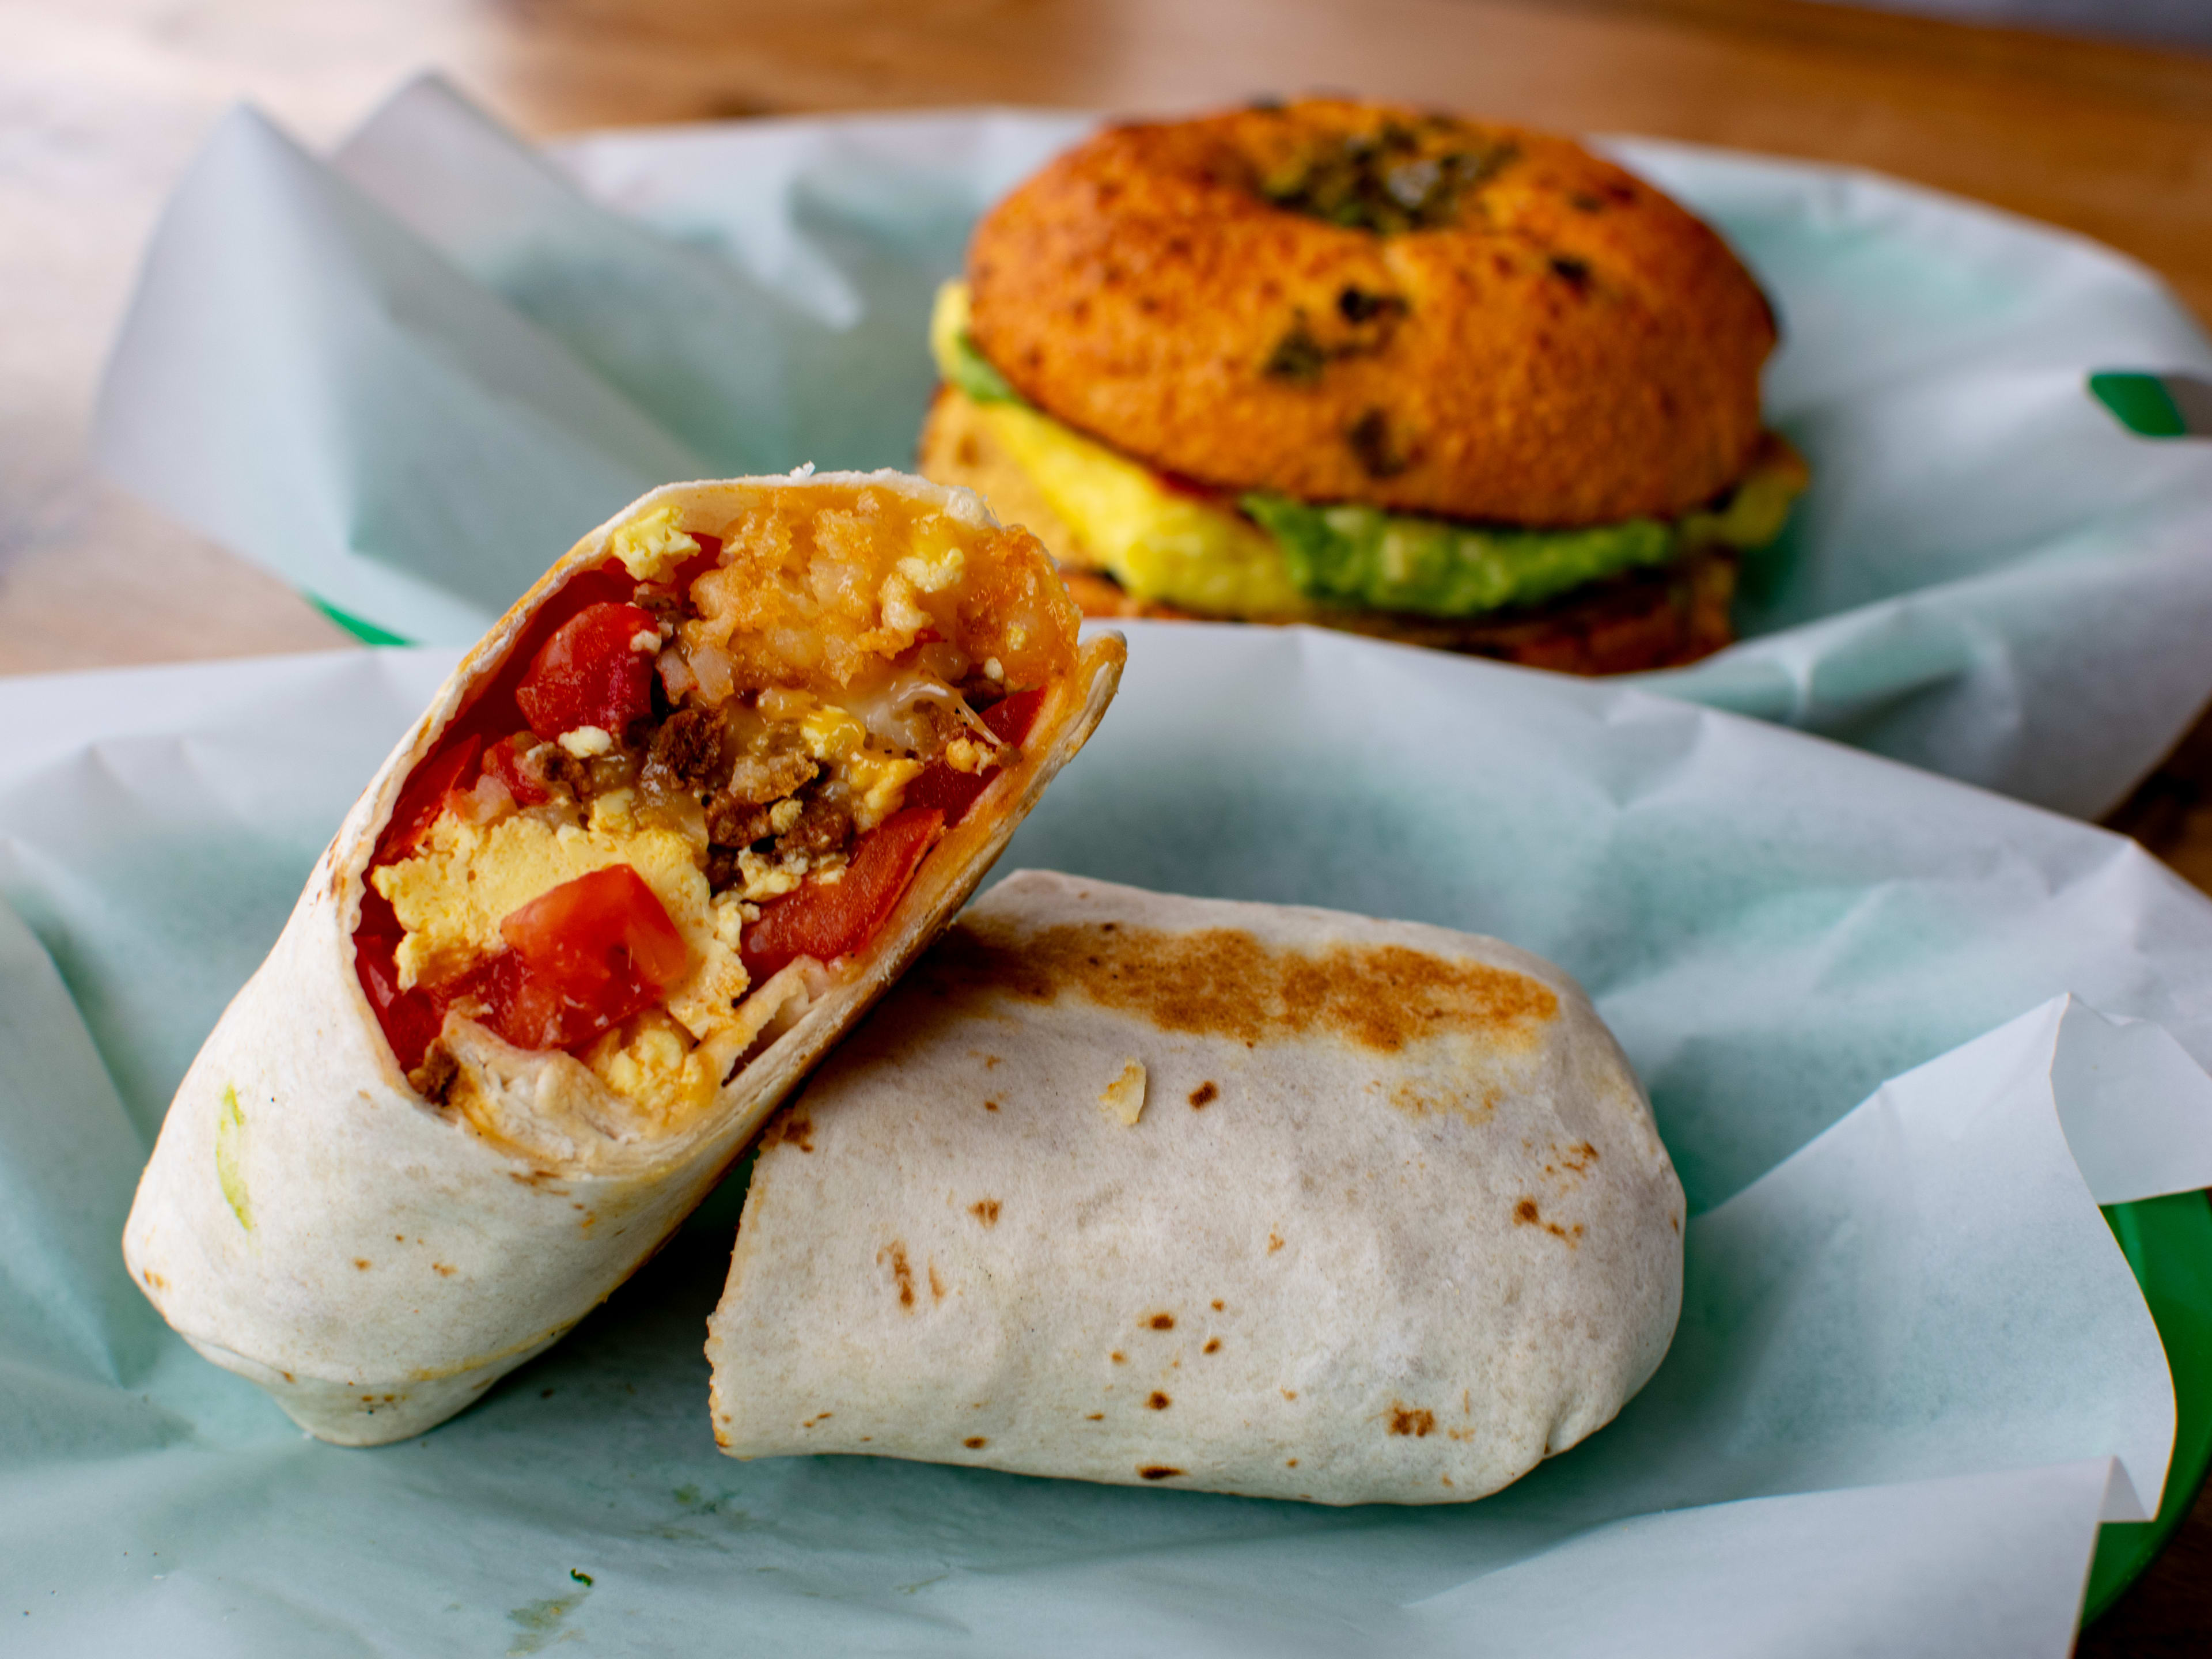 A breakfast burrito and breakfast sandwich on paper-lined trays.